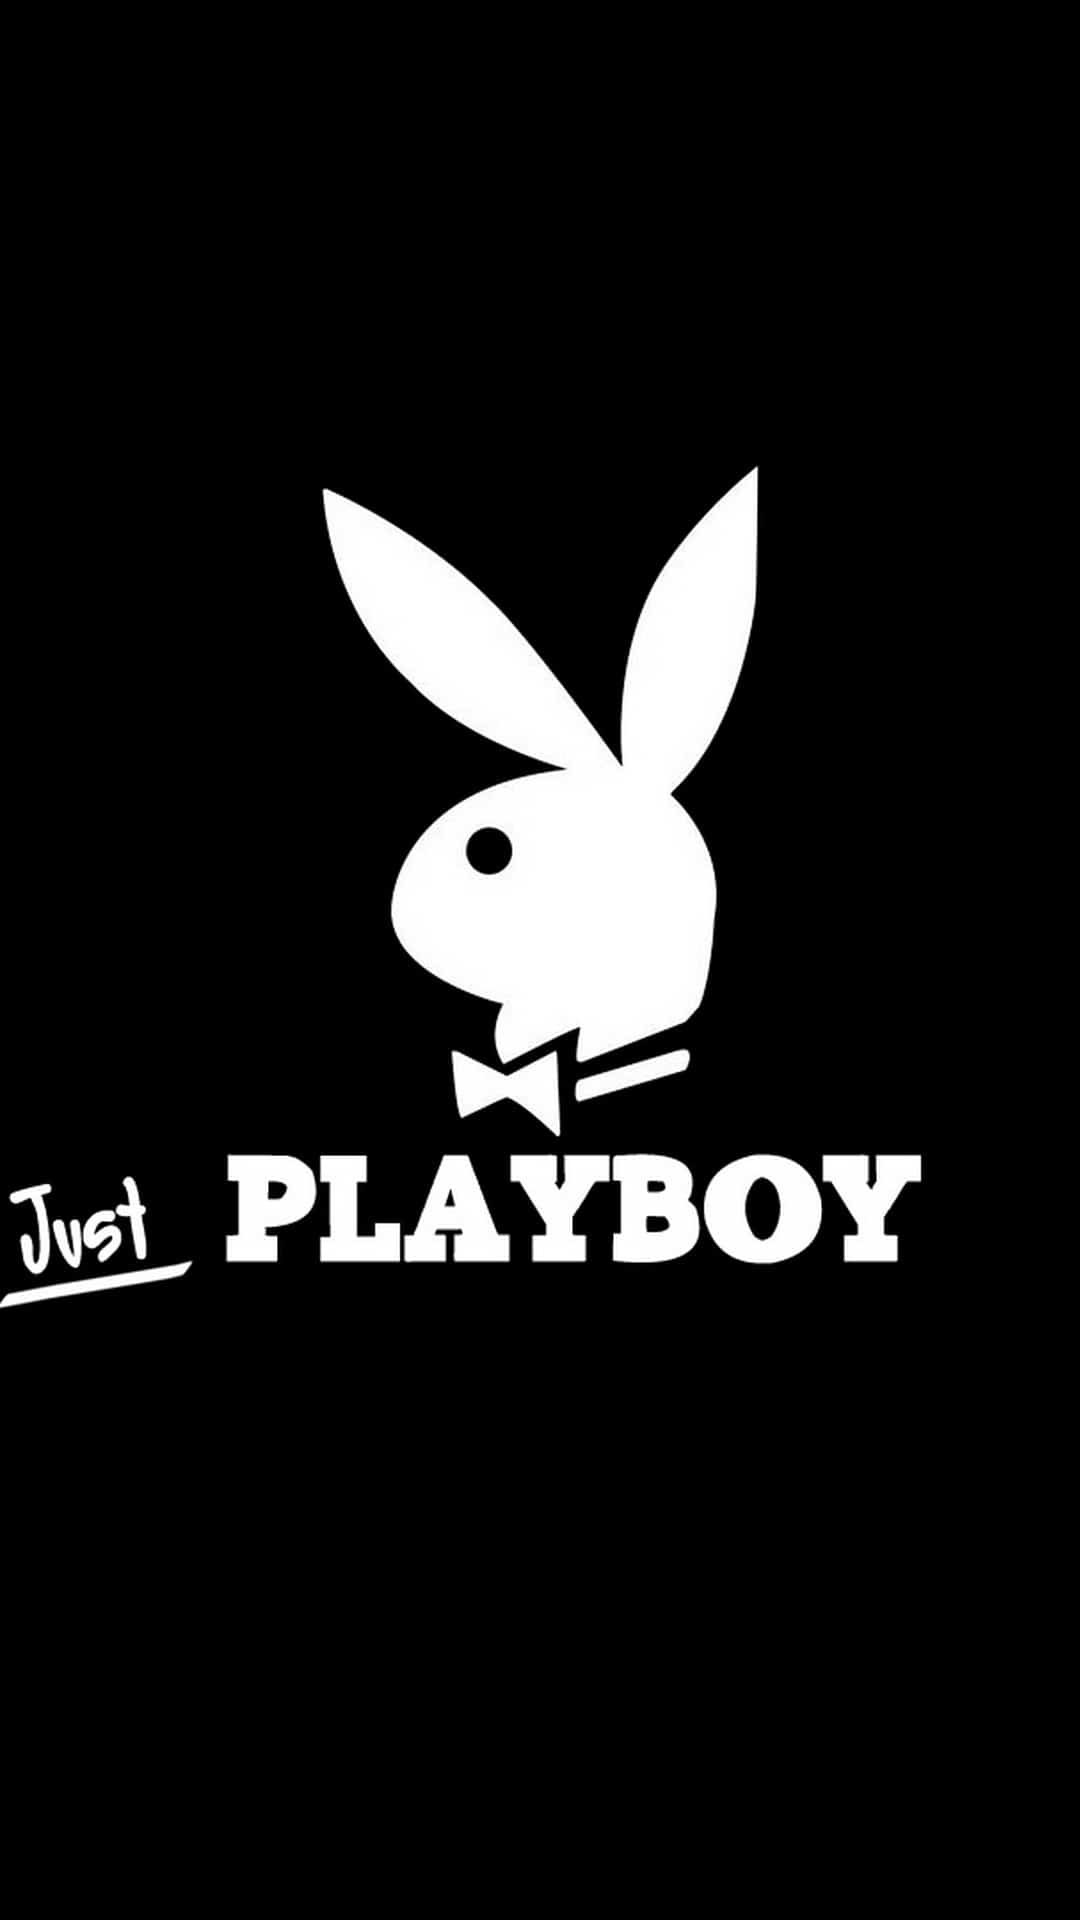 1080x1920 http://wallpaperformobile.org/13968/playboy-wall-papers.